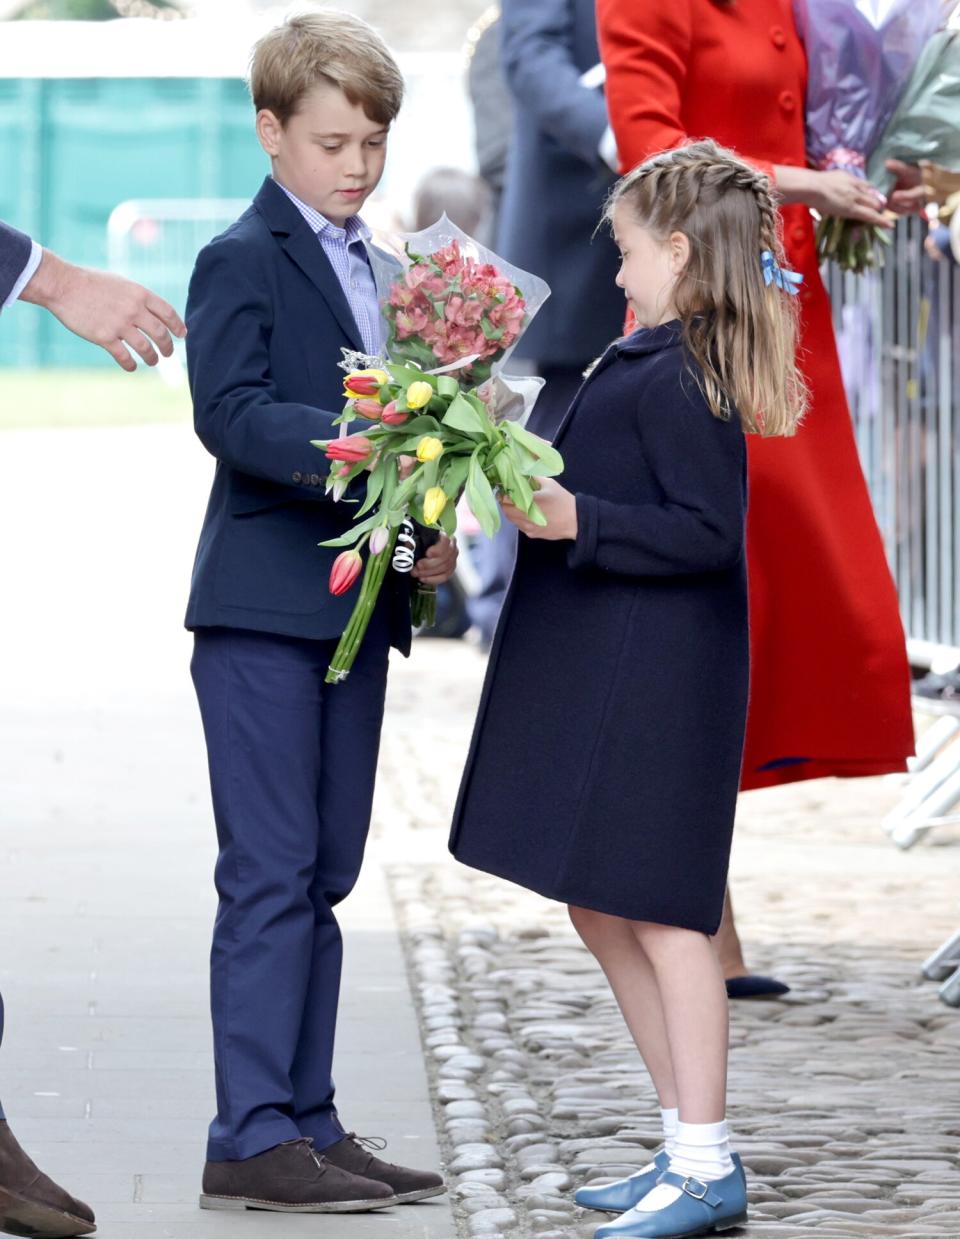 Prince George of Cambridge and Princess Charlotte of Cambridge hold gifts of flowers during a visit to Cardiff Castle